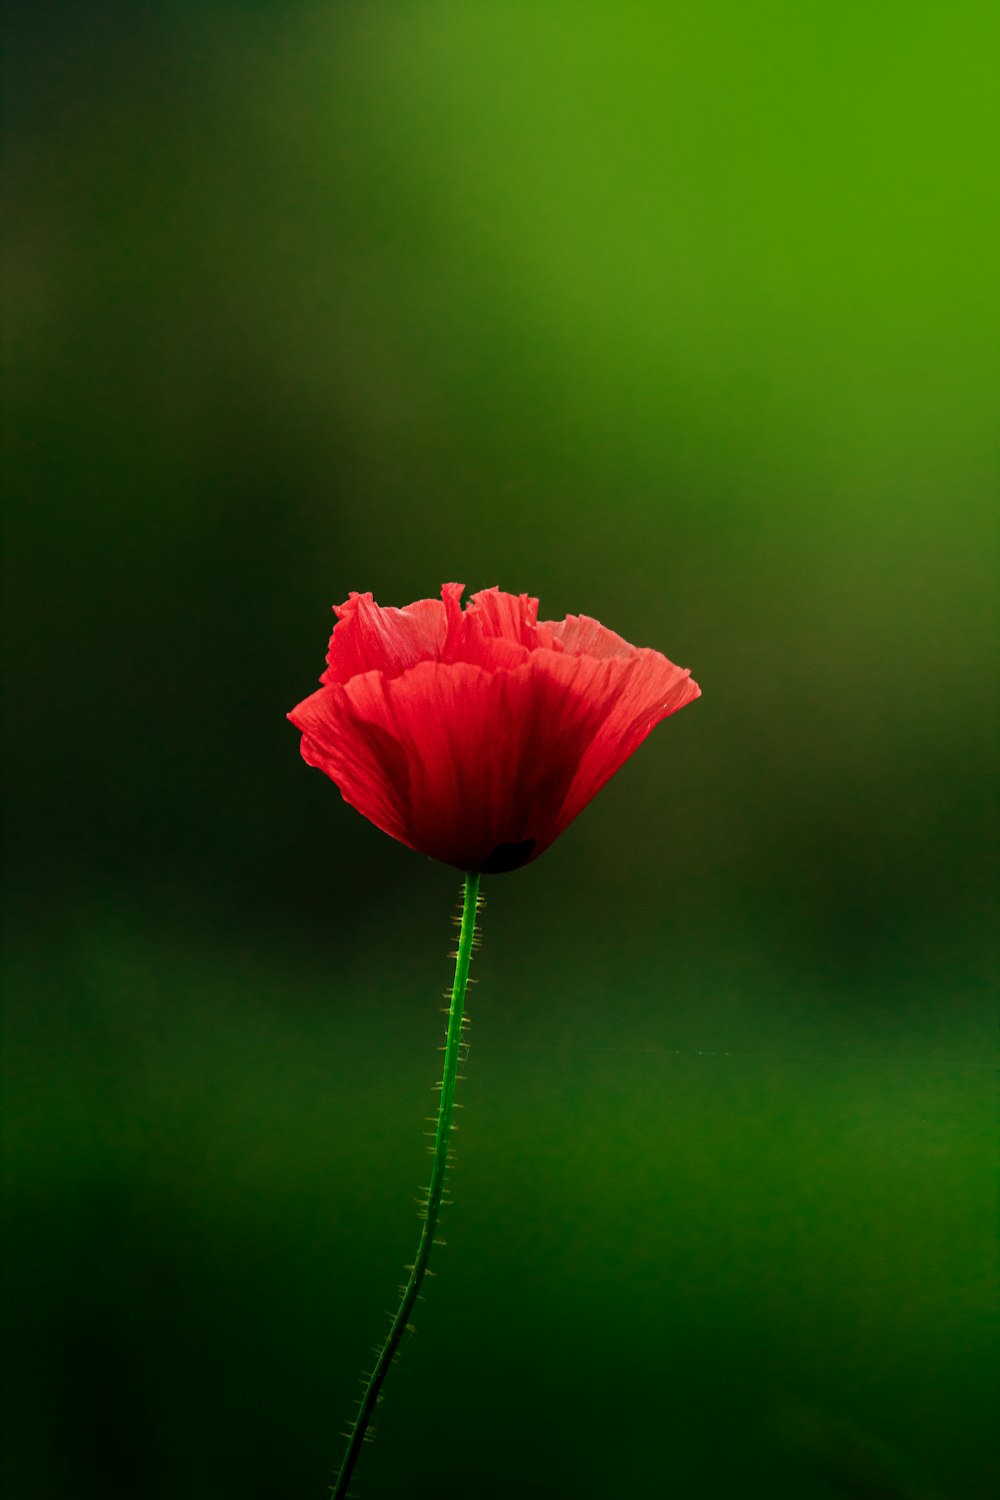 a single red flower with a green background